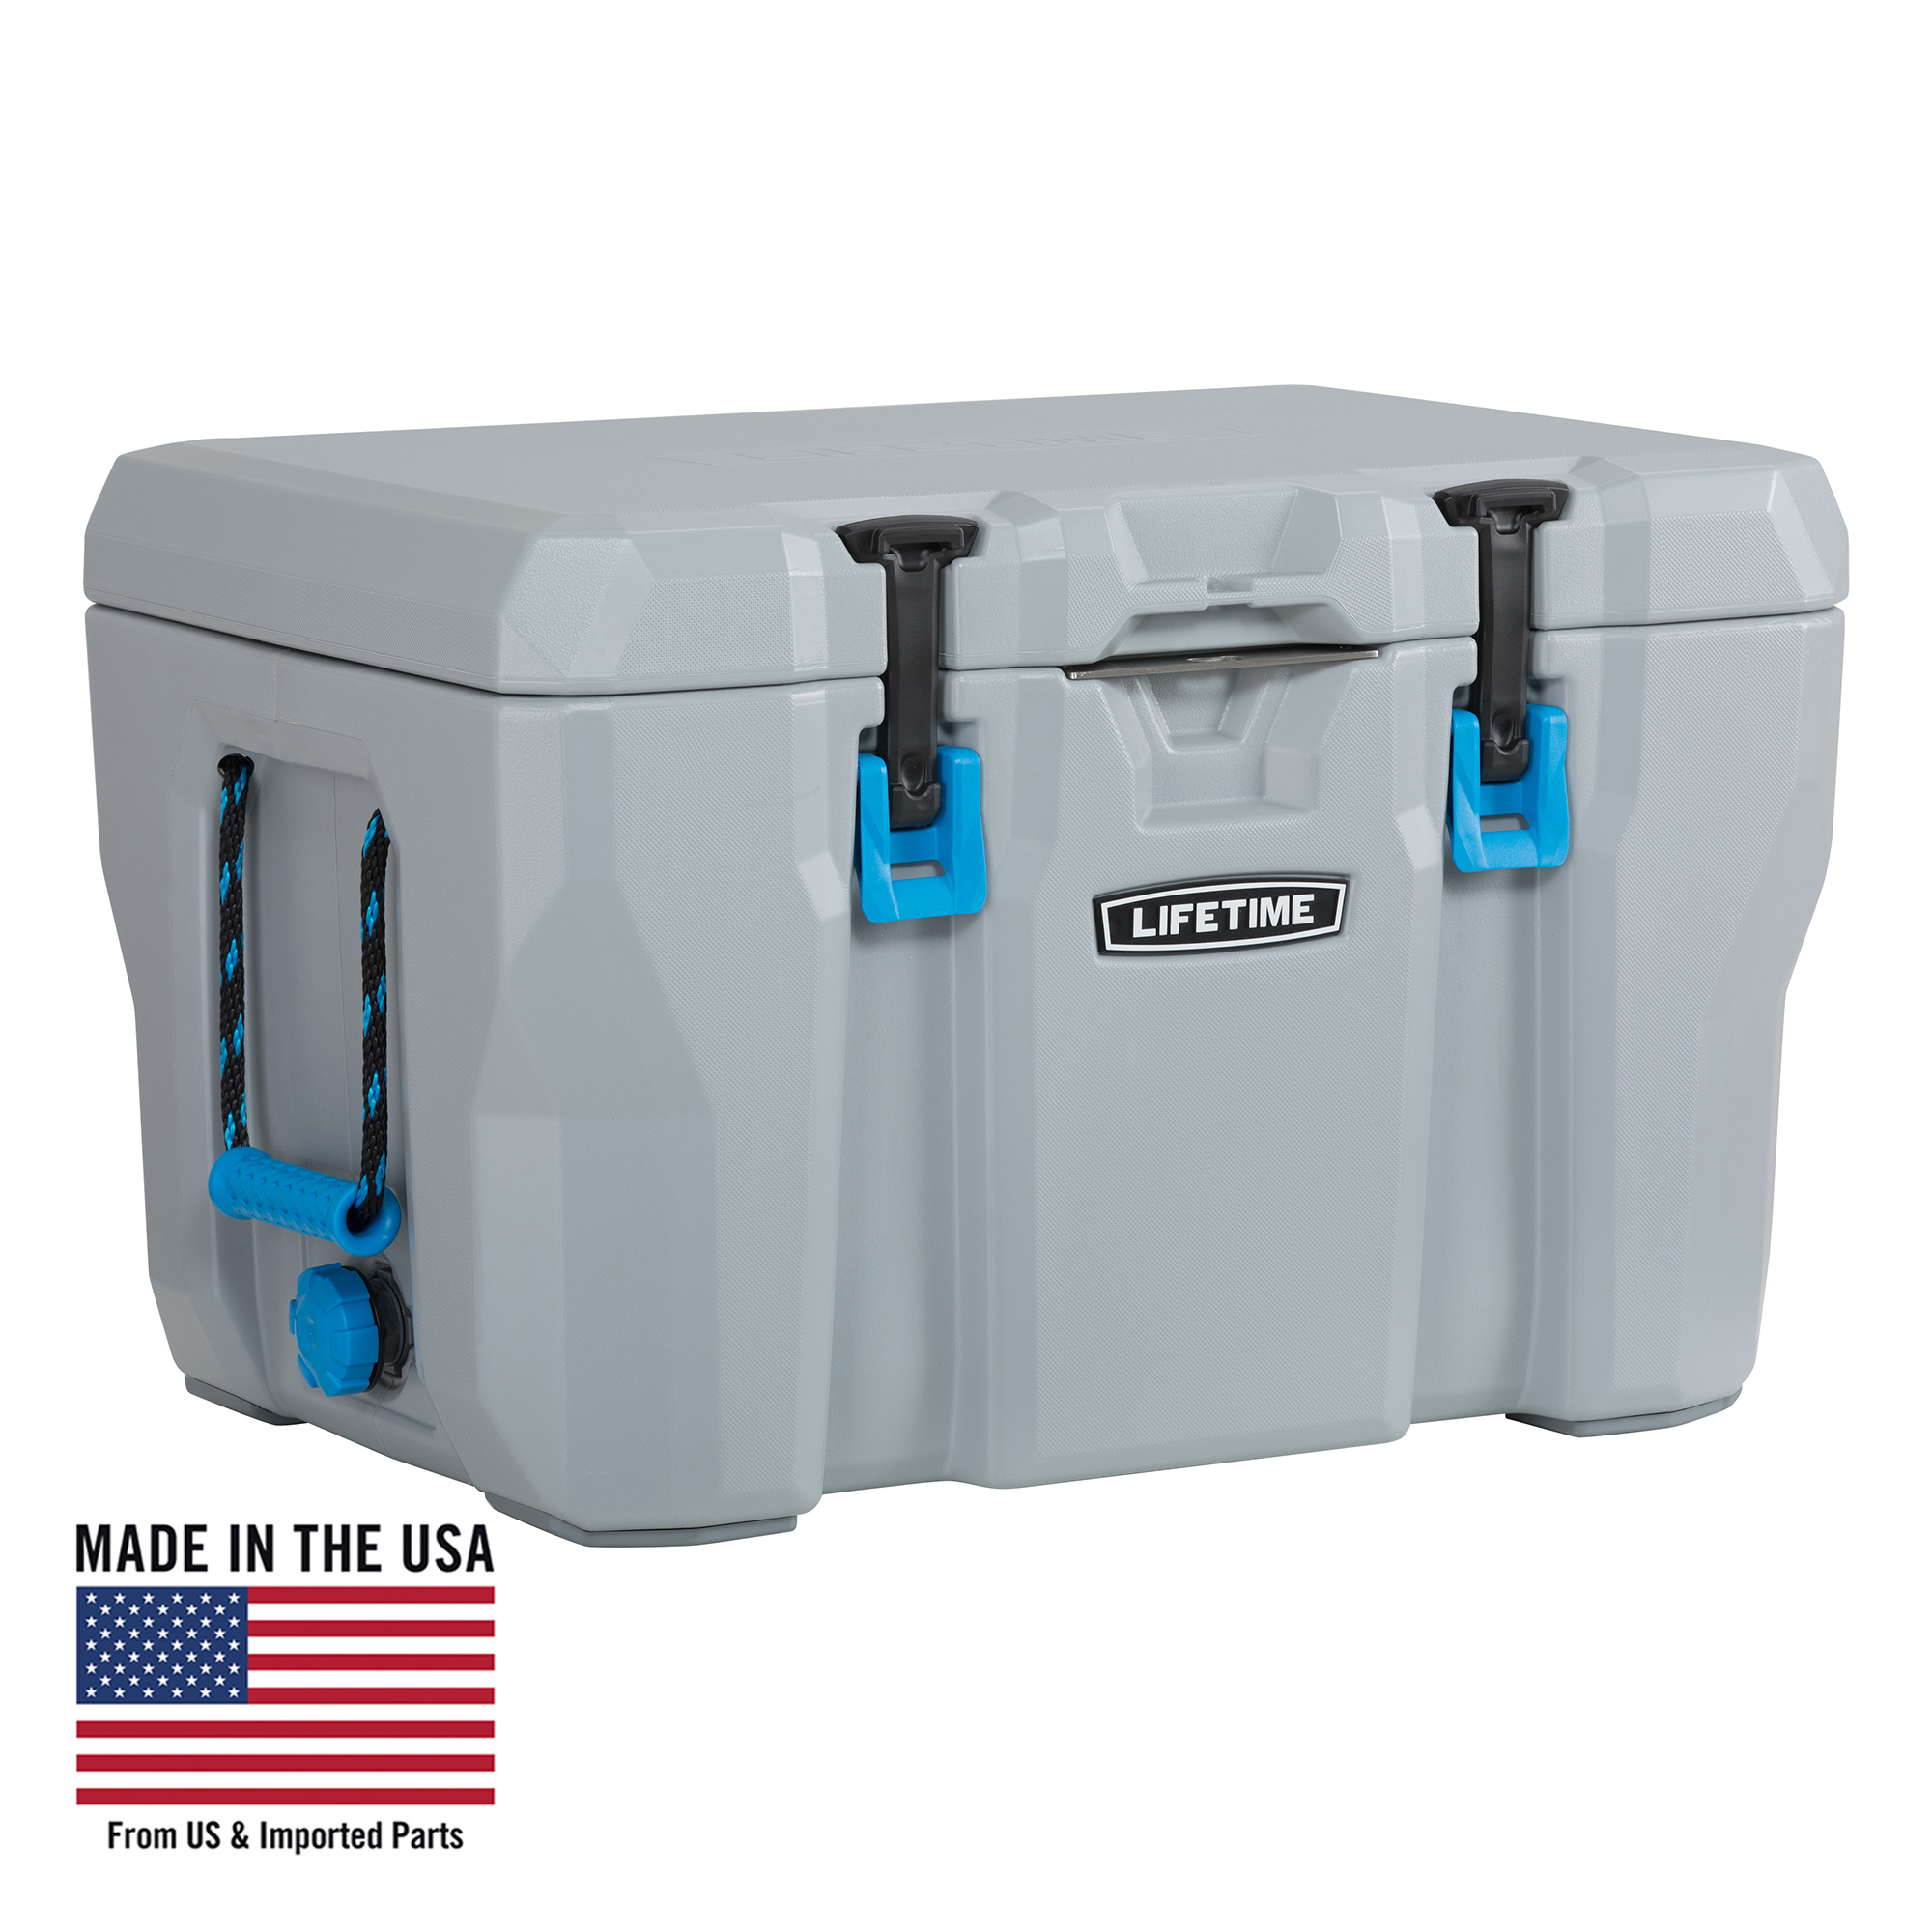 Lifetime Coolers - Made in USA